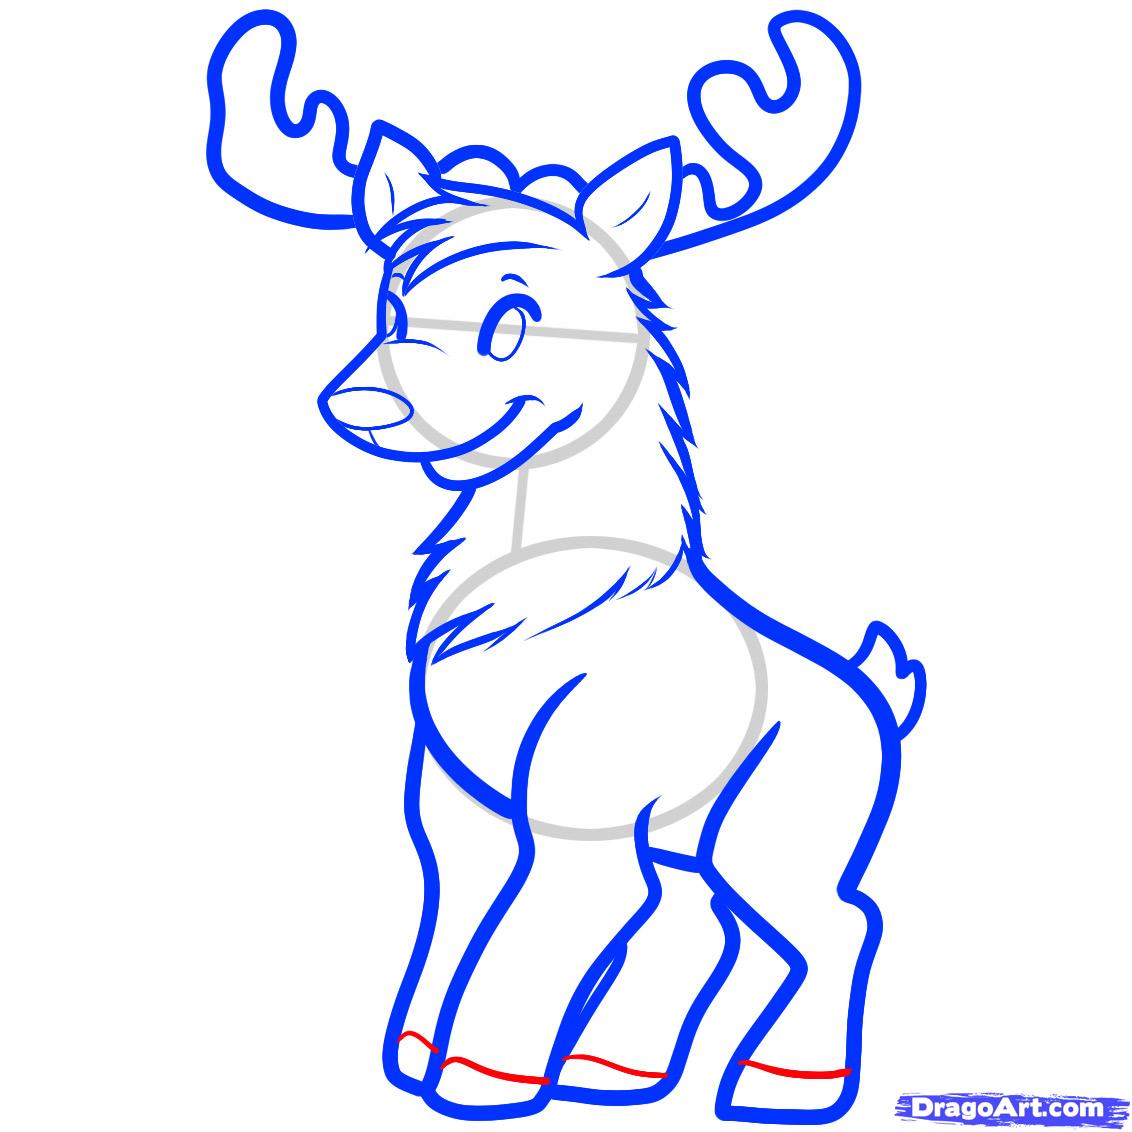 Newest For Reindeer Easy Christmas Drawings Step By Step | The Japingape